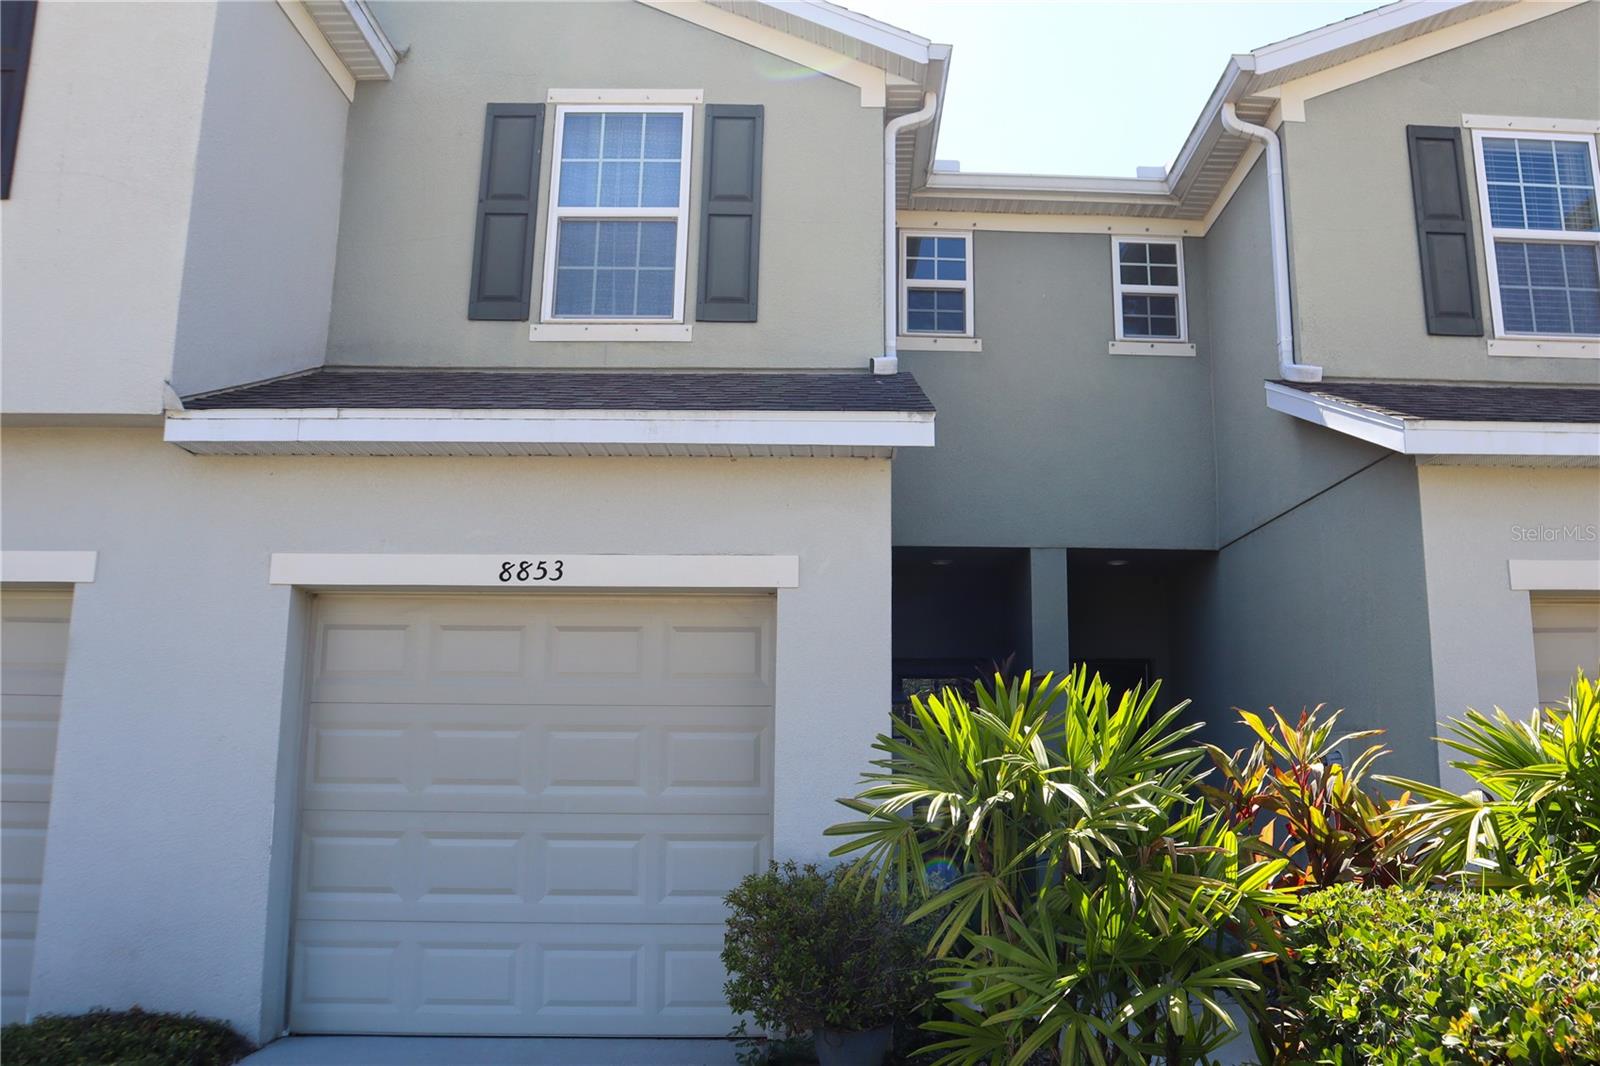 View TAMPA, FL 33619 townhome